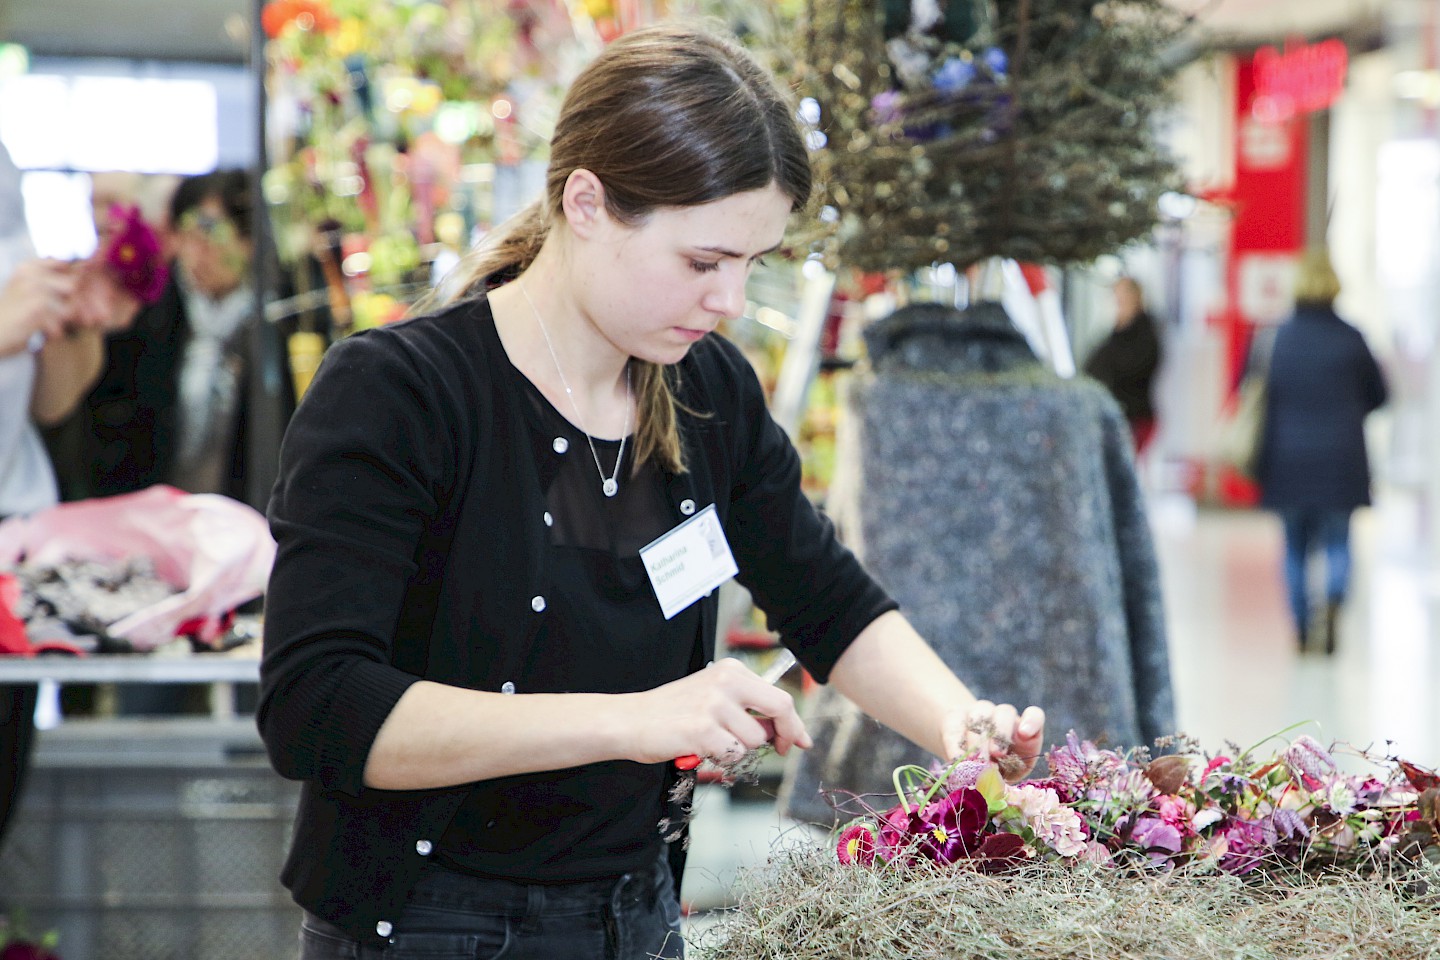 A young woman creates a floral arrangement on a wreath of twigs.